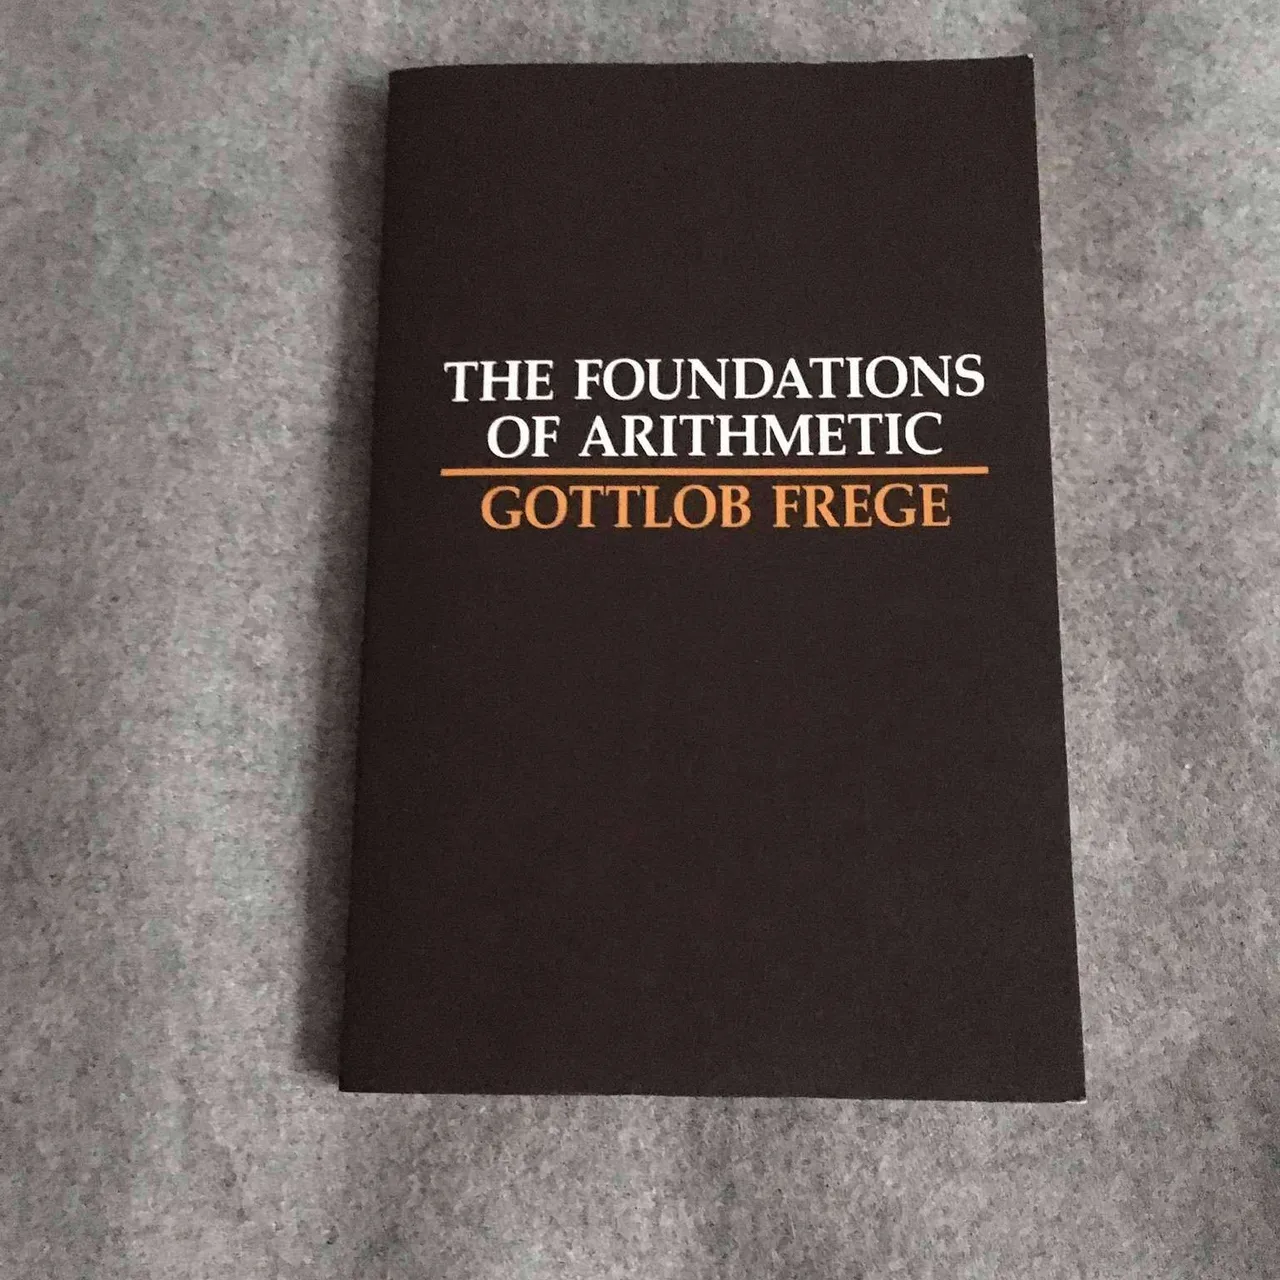 The Foundations of Arithmetic by Gottlob Frege photo 1